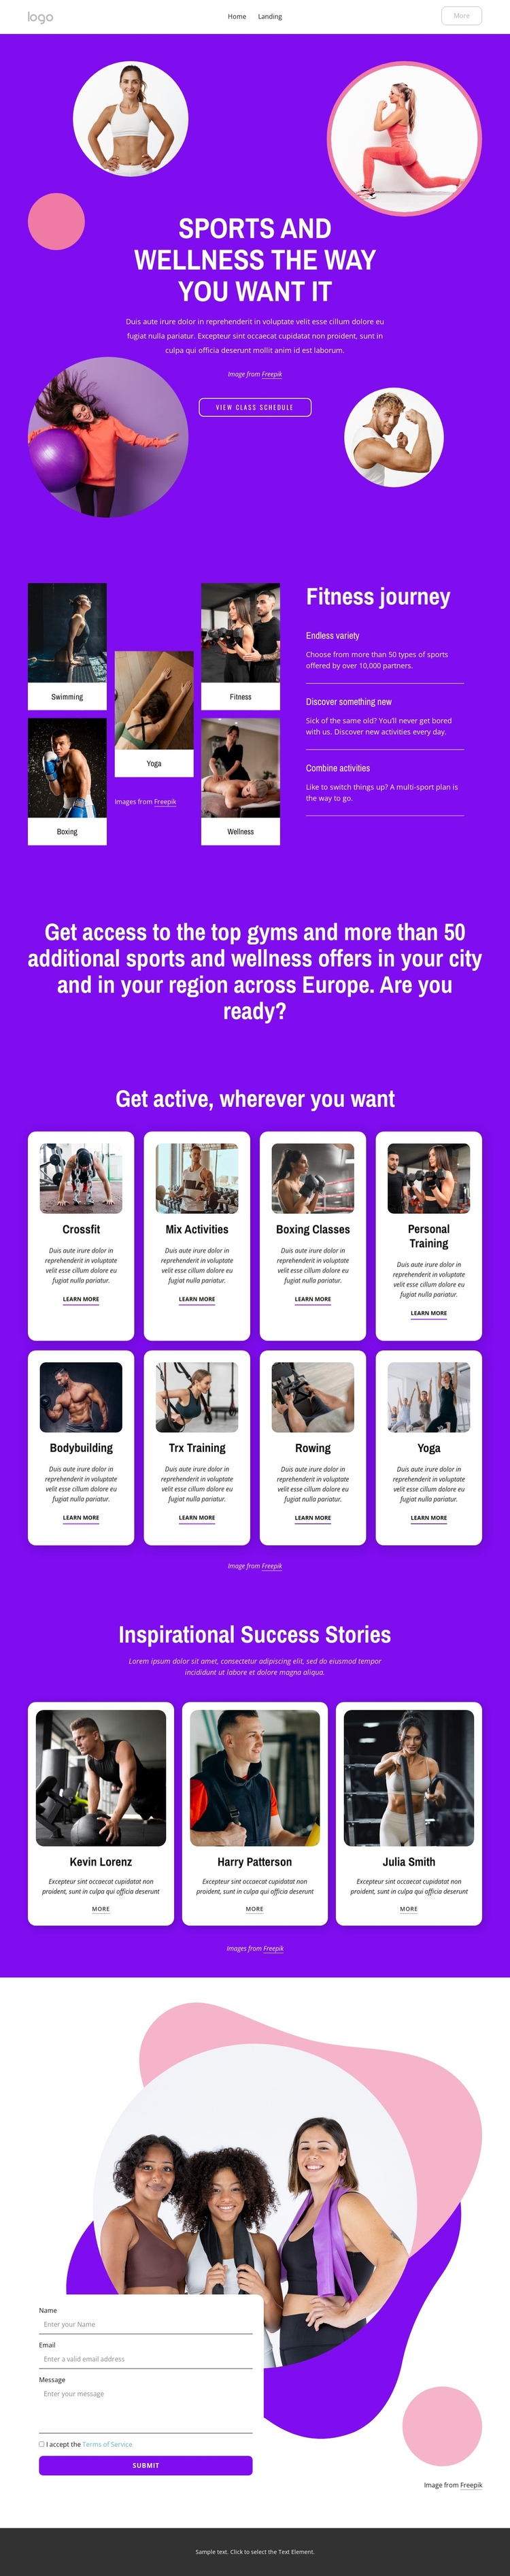 Sports and wellness the way you want it Website Builder Software